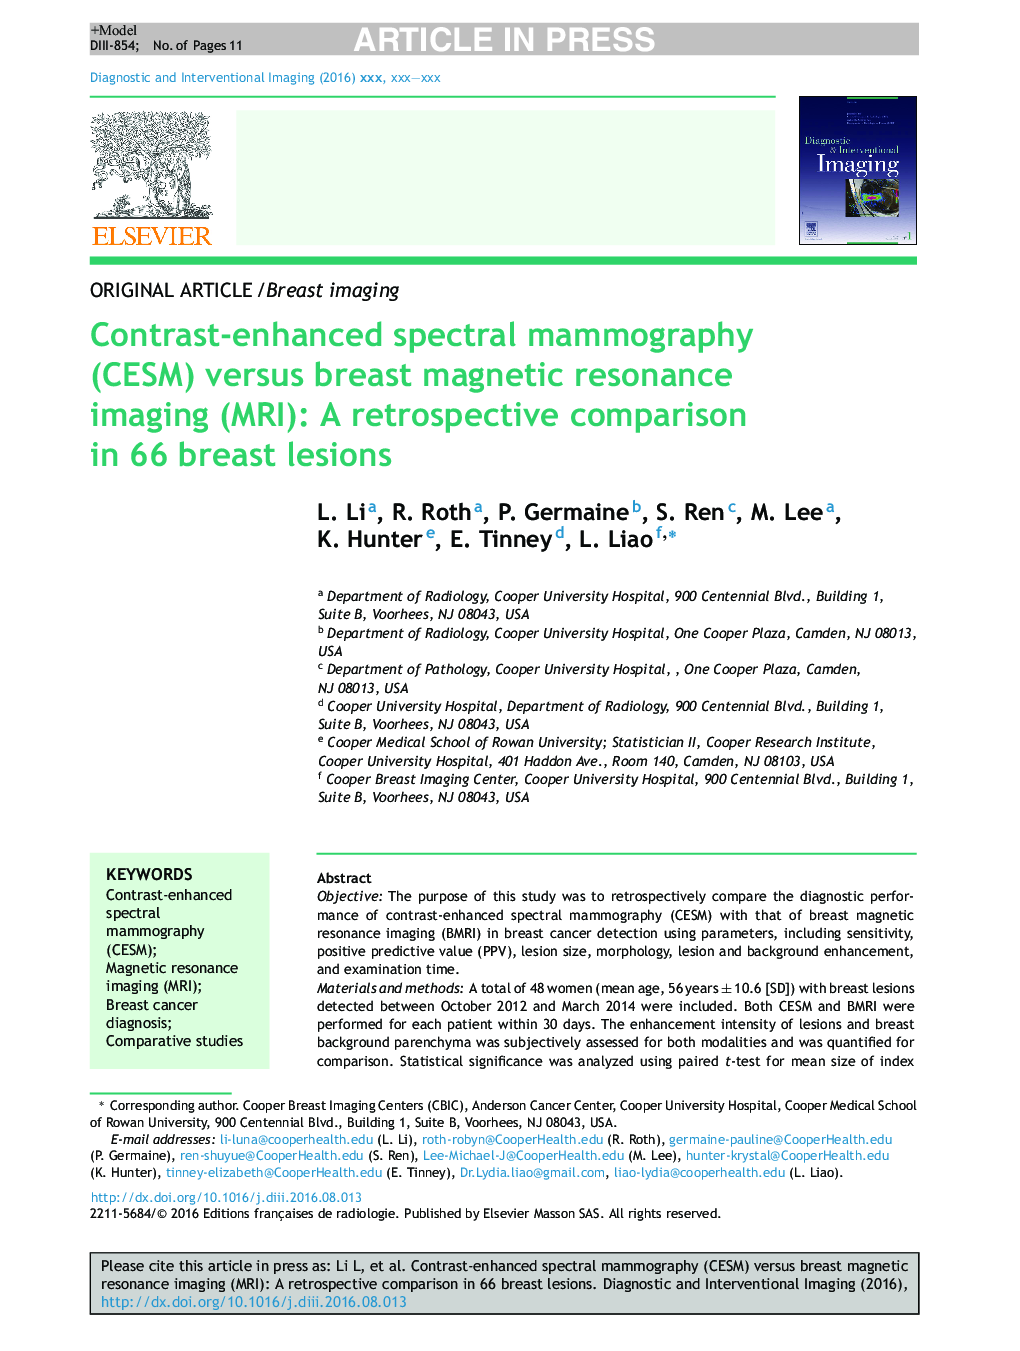 Contrast-enhanced spectral mammography (CESM) versus breast magnetic resonance imaging (MRI): A retrospective comparison in 66 breast lesions